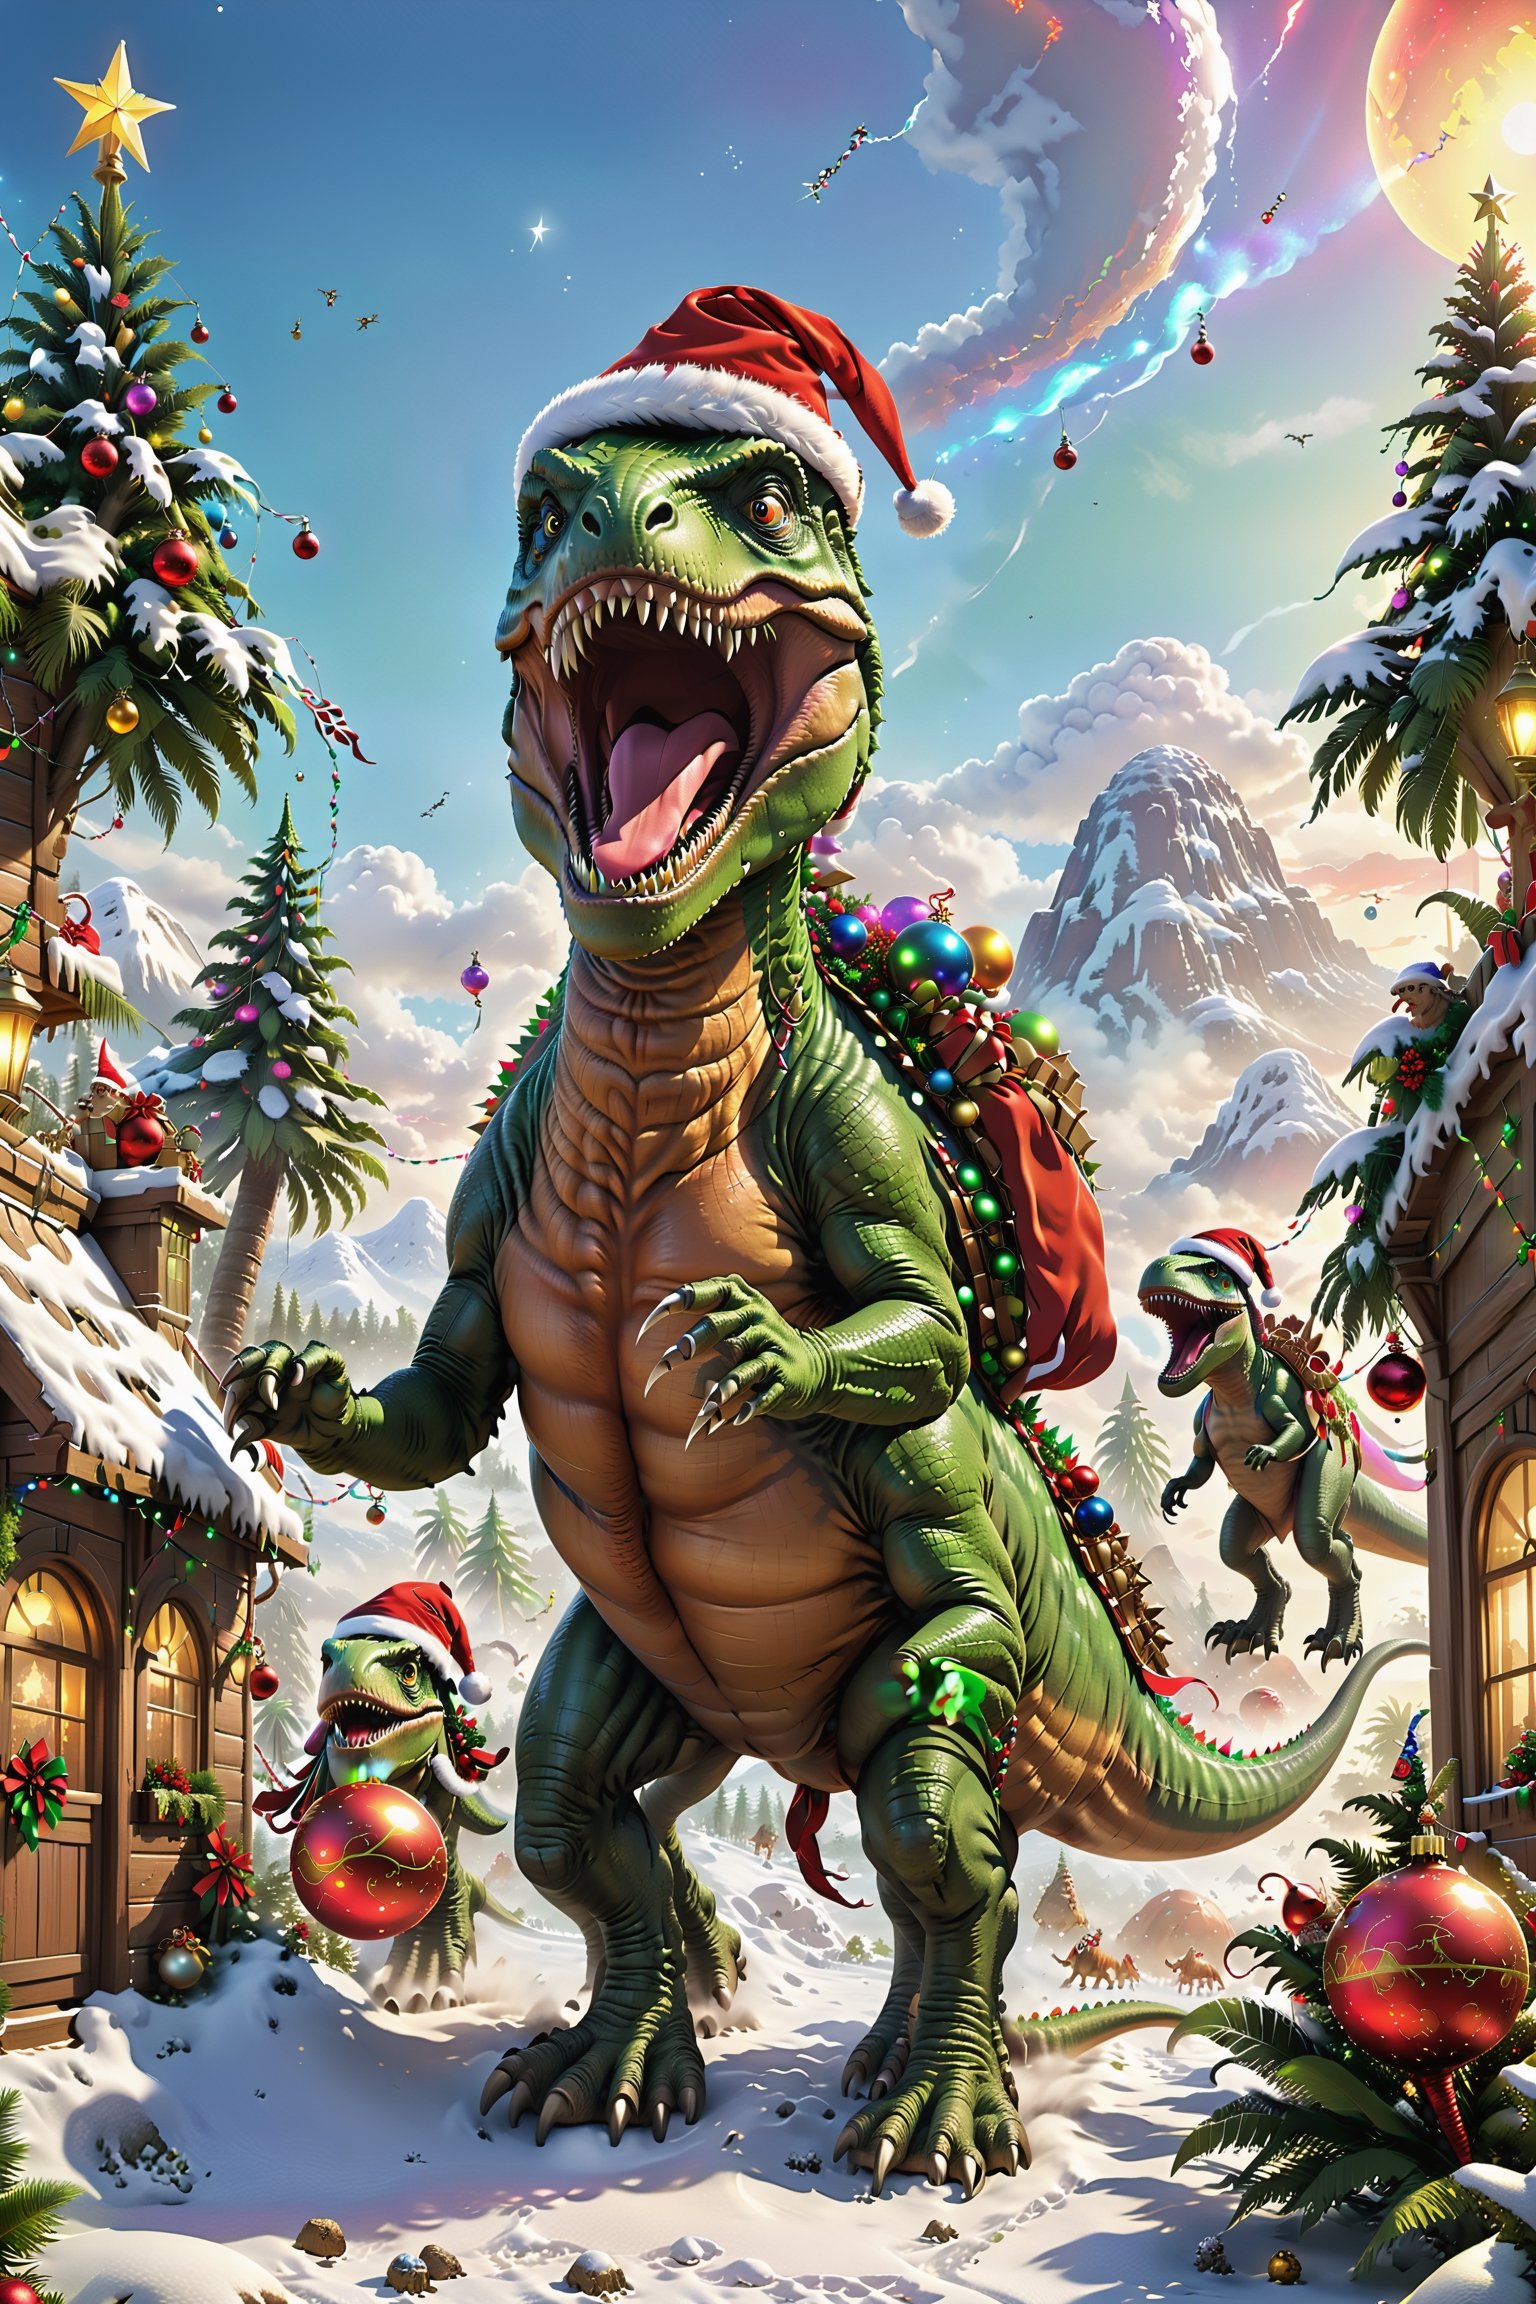 Santa Claus rides on the back of a Tyrannosaurus Rex in this amazing scene that combines traditional Christmas imagery with the Jurassic era to create a fantastical image.

The T. rex is tall and powerful, adorned with colorful Christmas lights and a string of Christmas balls hanging from its head. The T. rex may also have some Christmas hangings on his body, such as red ribbons or bells, adding a festive touch to this T. rex Christmas messenger.

Santa Claus is wearing a special Christmas vest and waving a Christmas decoration similar to a reindeer whip in his hand. His eyes reveal joy and excitement, as if he is delighting in this fantastical riding experience.

Surrounding him is an ancient and mysterious Jurassic era scene, with tall palm trees, strange vegetation, and dinosaurs running in the distance, building up the scene even more colorful.

The whole picture highlights the adventurous spirit of Santa Claus, freeing him from the busy work of gift preparation and traveling through time with the Tyrannosaurus Rex, bringing a whole new level of creativity and fun to this special Christmas season.